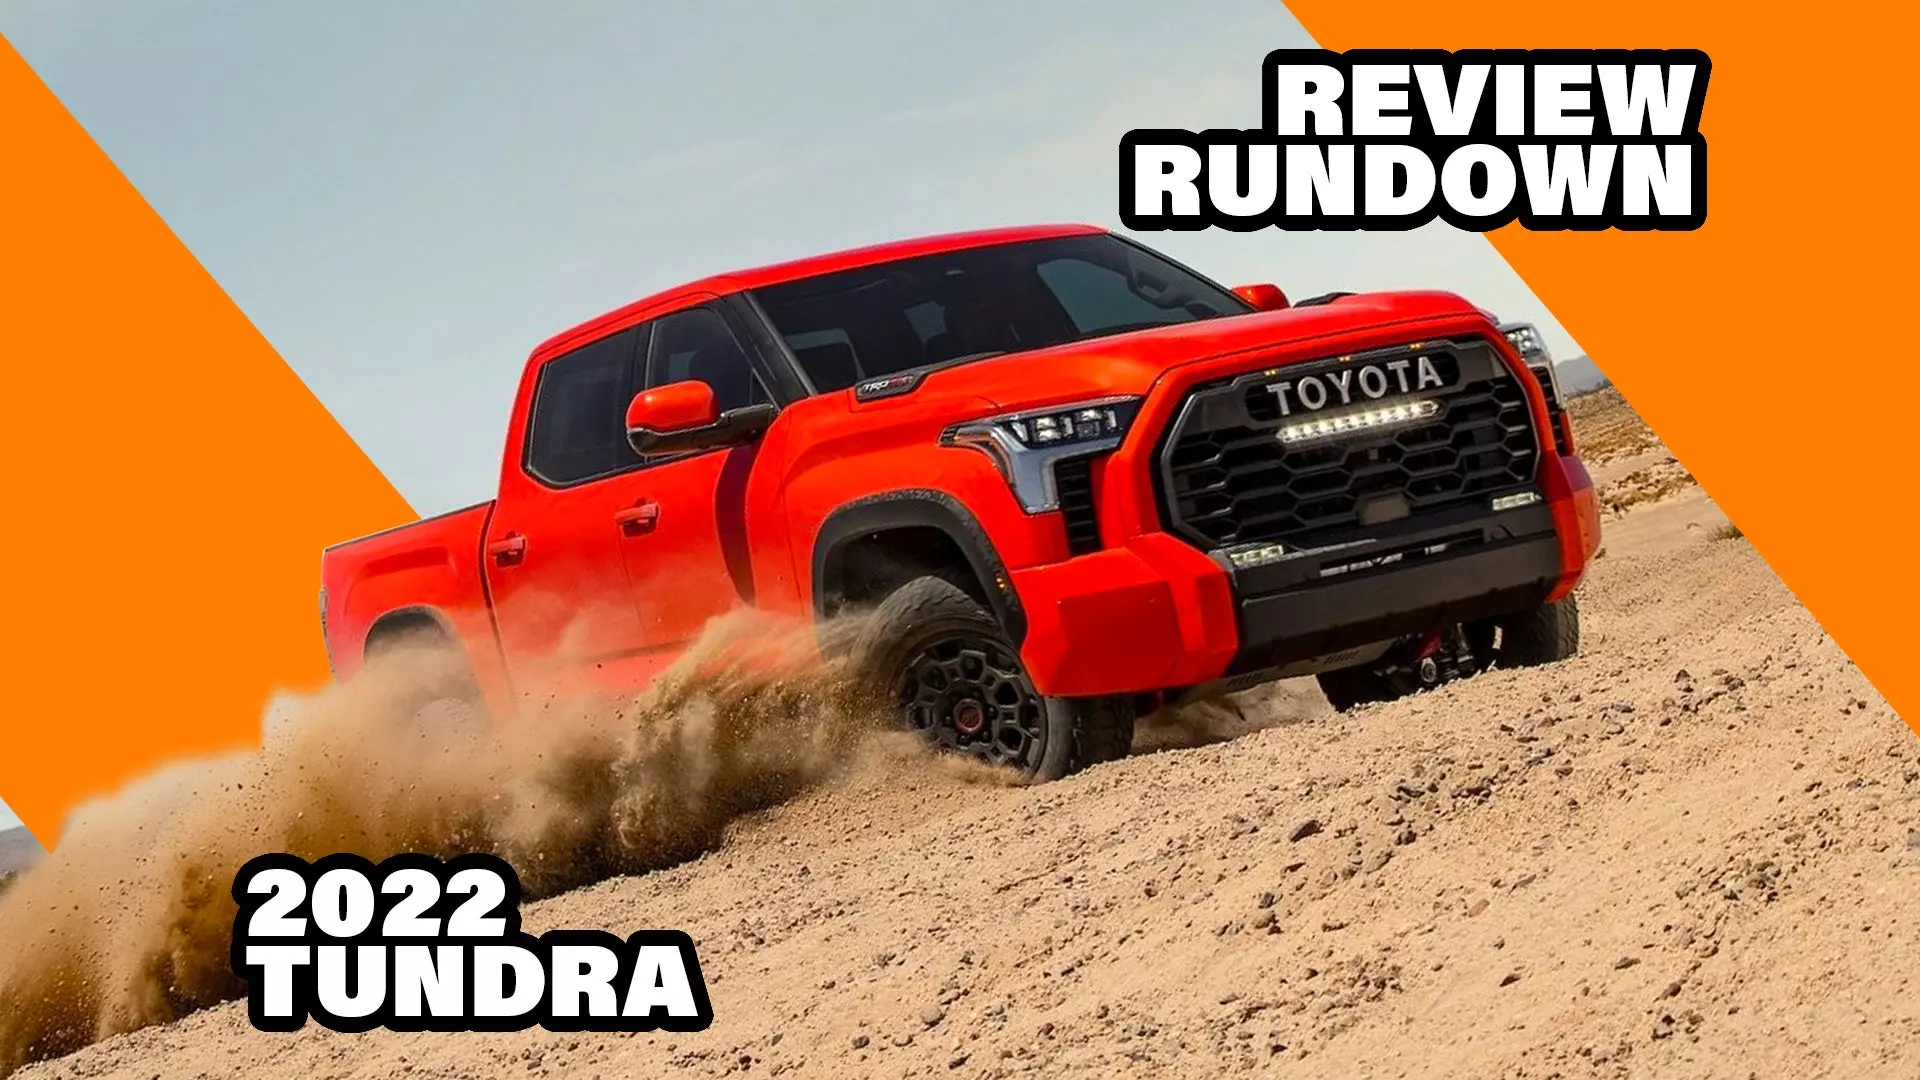 2023 Toyota Tundra Review Rundown: Big Improvements in Comfort and Control | Autance